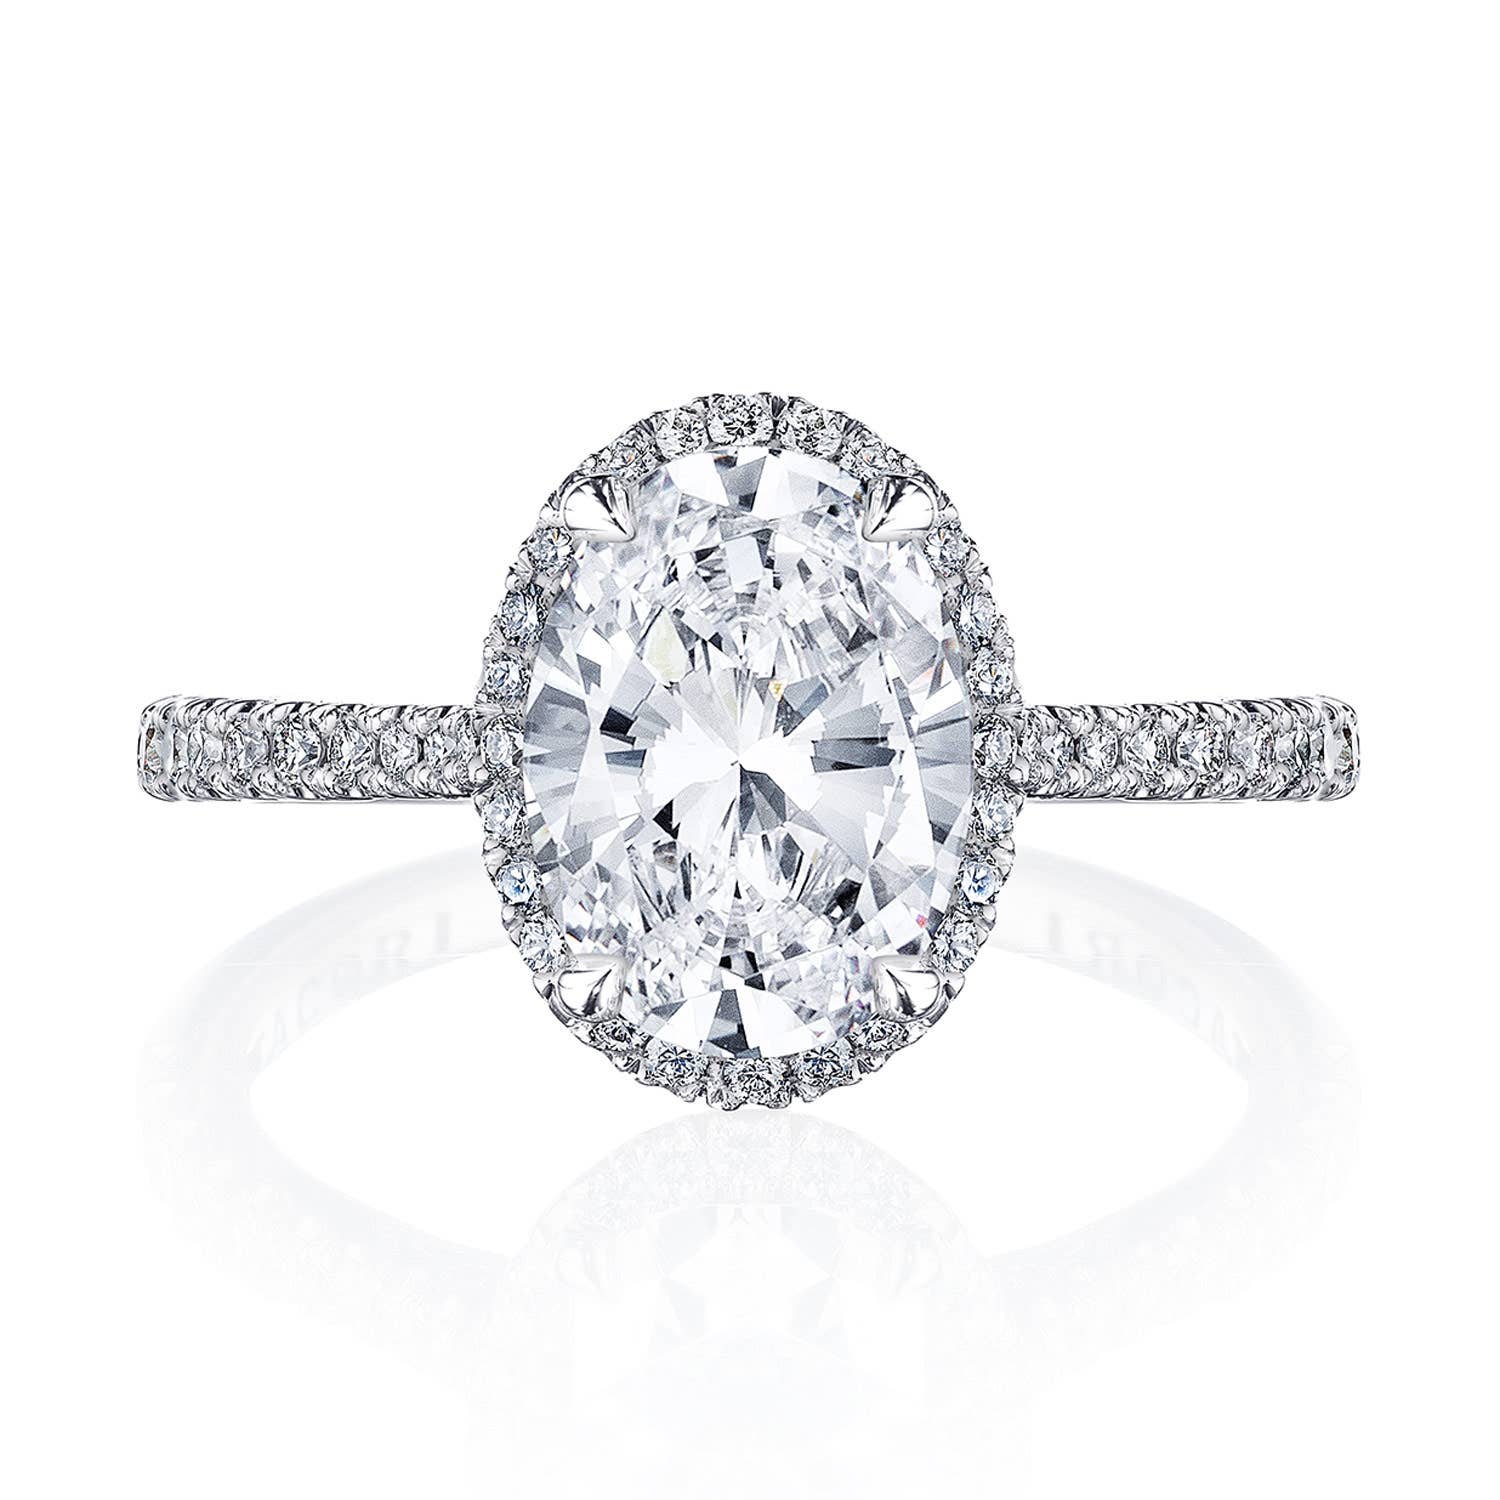 Oval Bloom Engagement Ring